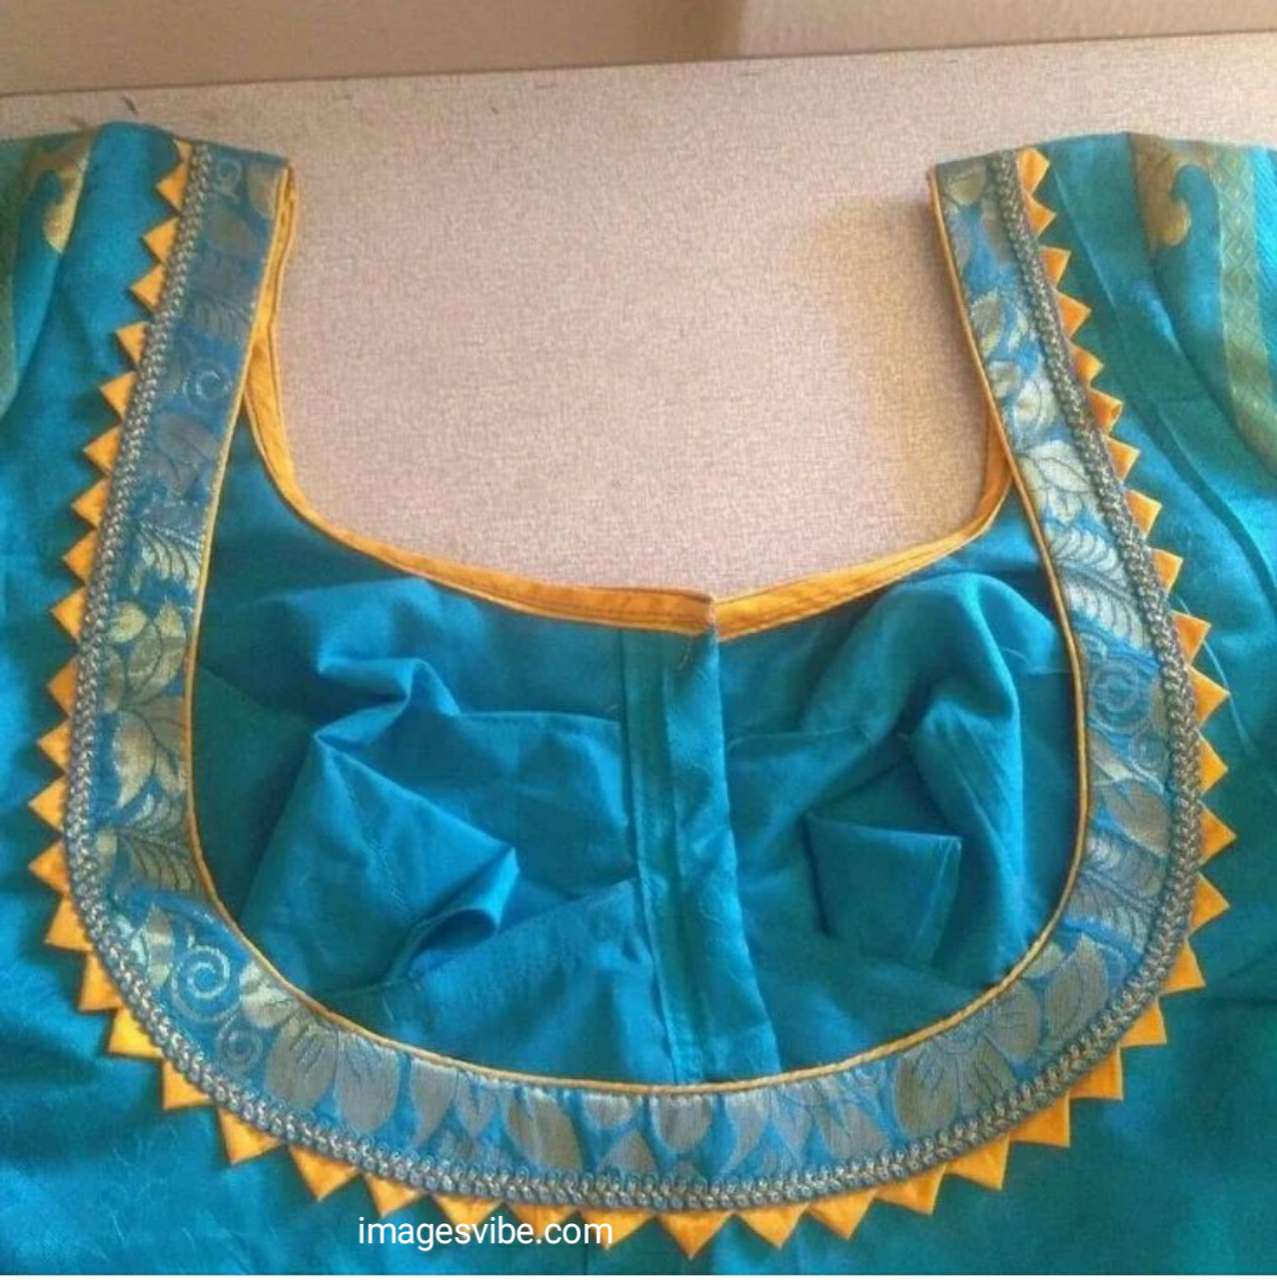 New Simple Aari Work Blouse Images Design 2023 - Images Vibe